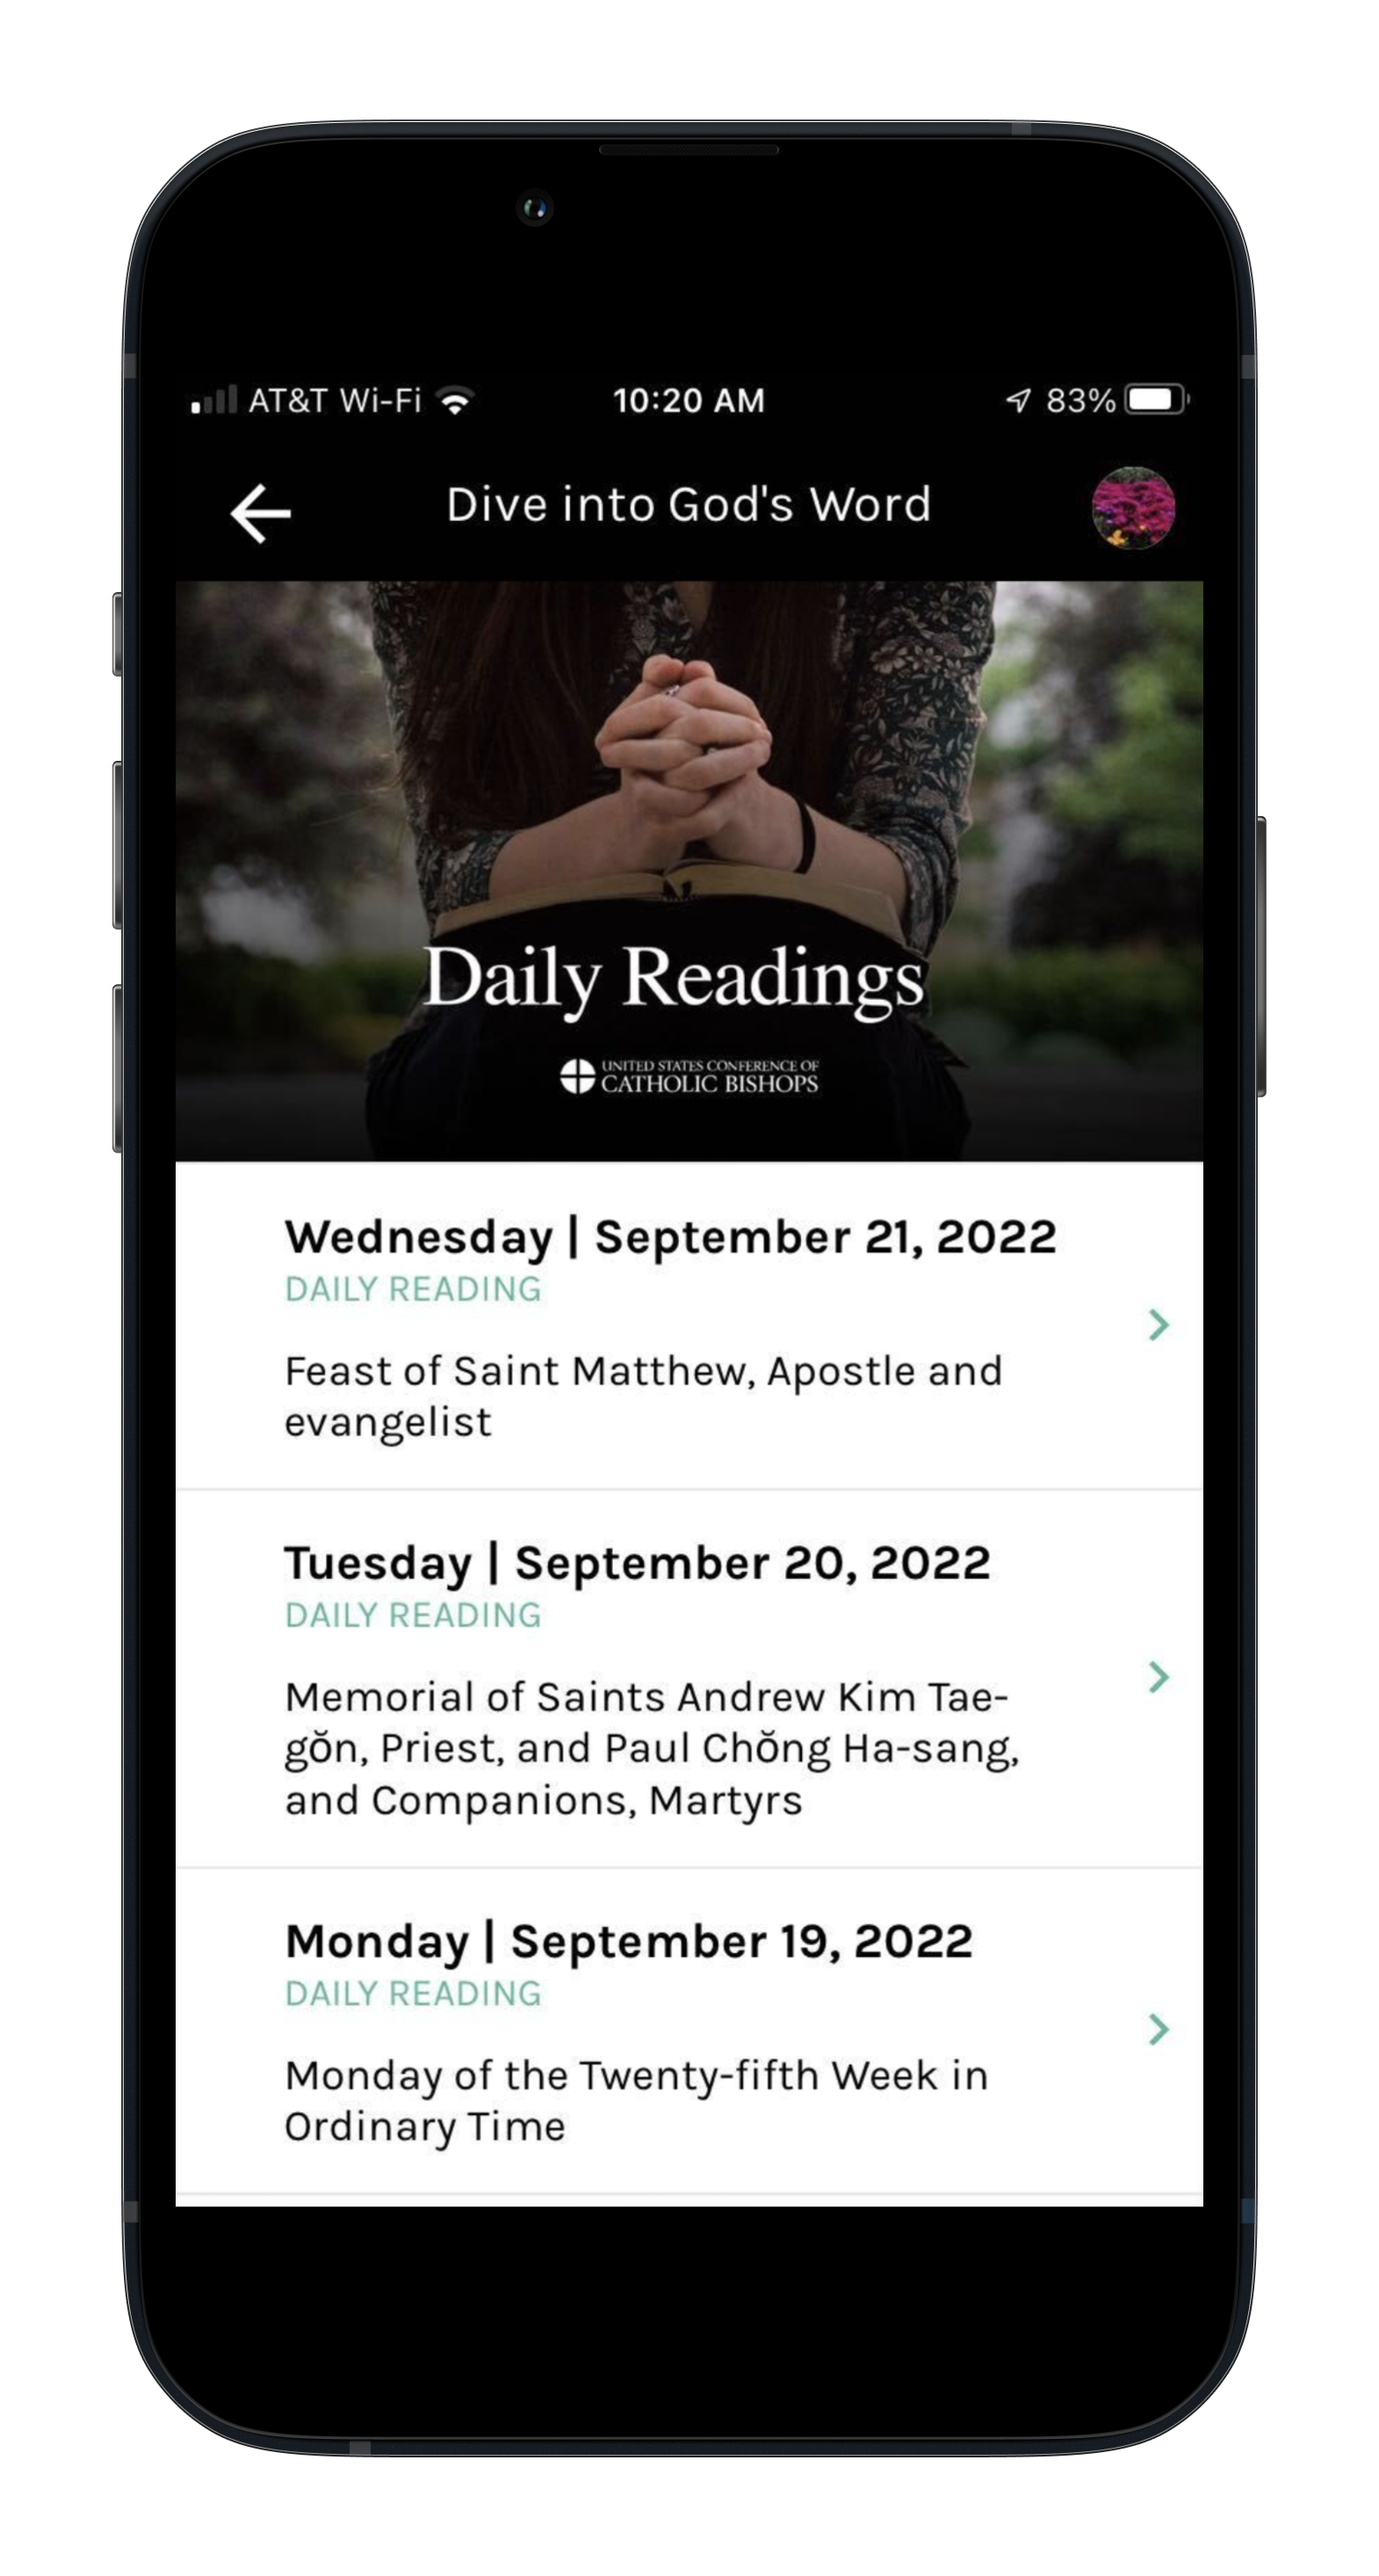 Image displaying the Daily Readings screen with an image of a person with their hands folded over an open book. The reading list is below.